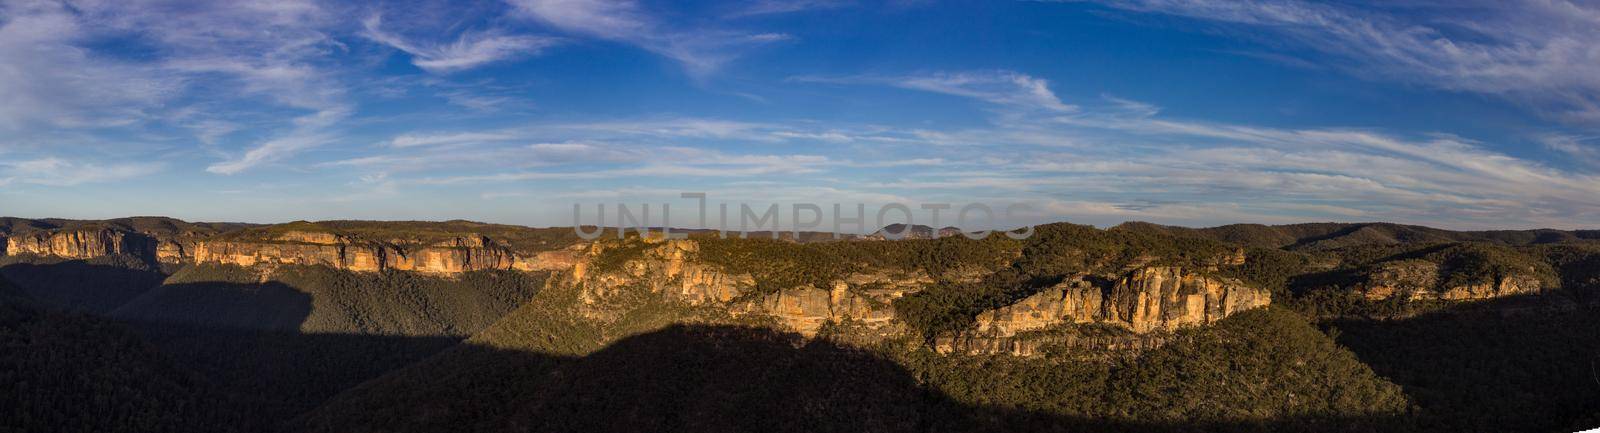 panorama of the Blue Mountains National Park landscape, Australia by bettercallcurry